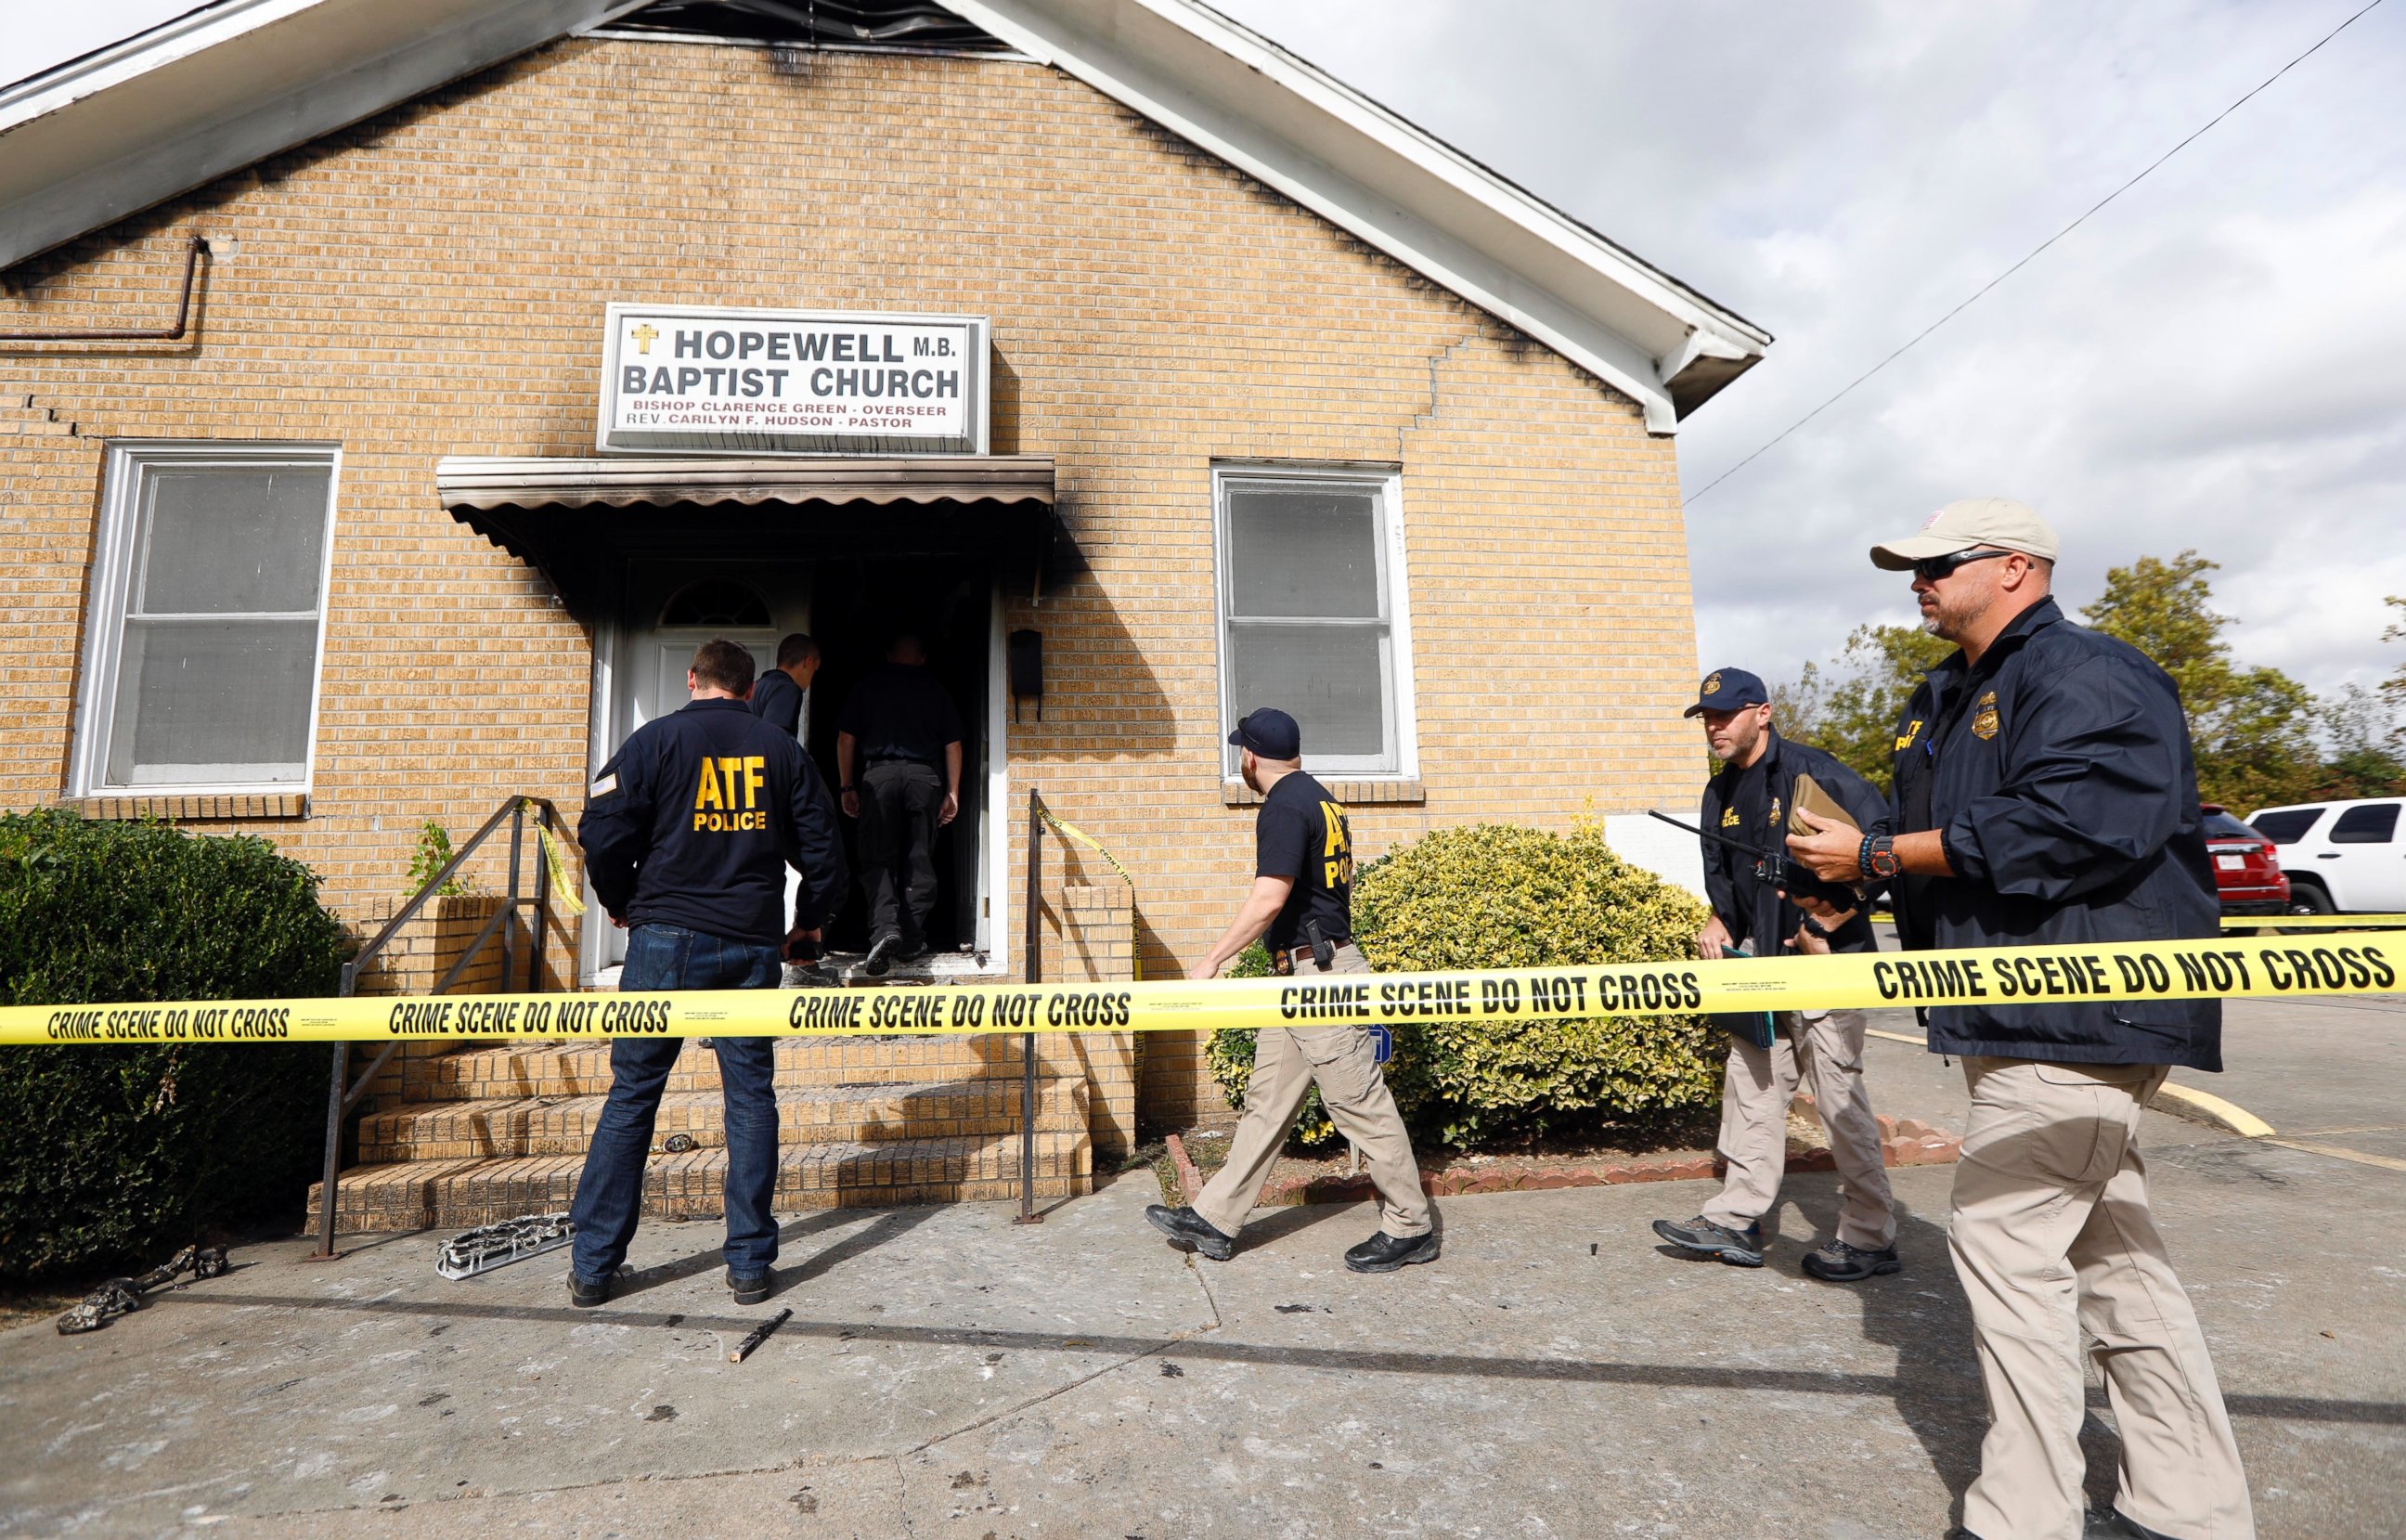 PHOTO: ATF agents gather outside the fire damaged Hopewell M.B. Baptist Church in Greenville, Mississippi, Nov. 2, 2016. "Vote Trump" was spray-painted on an outside wall of the black member church.